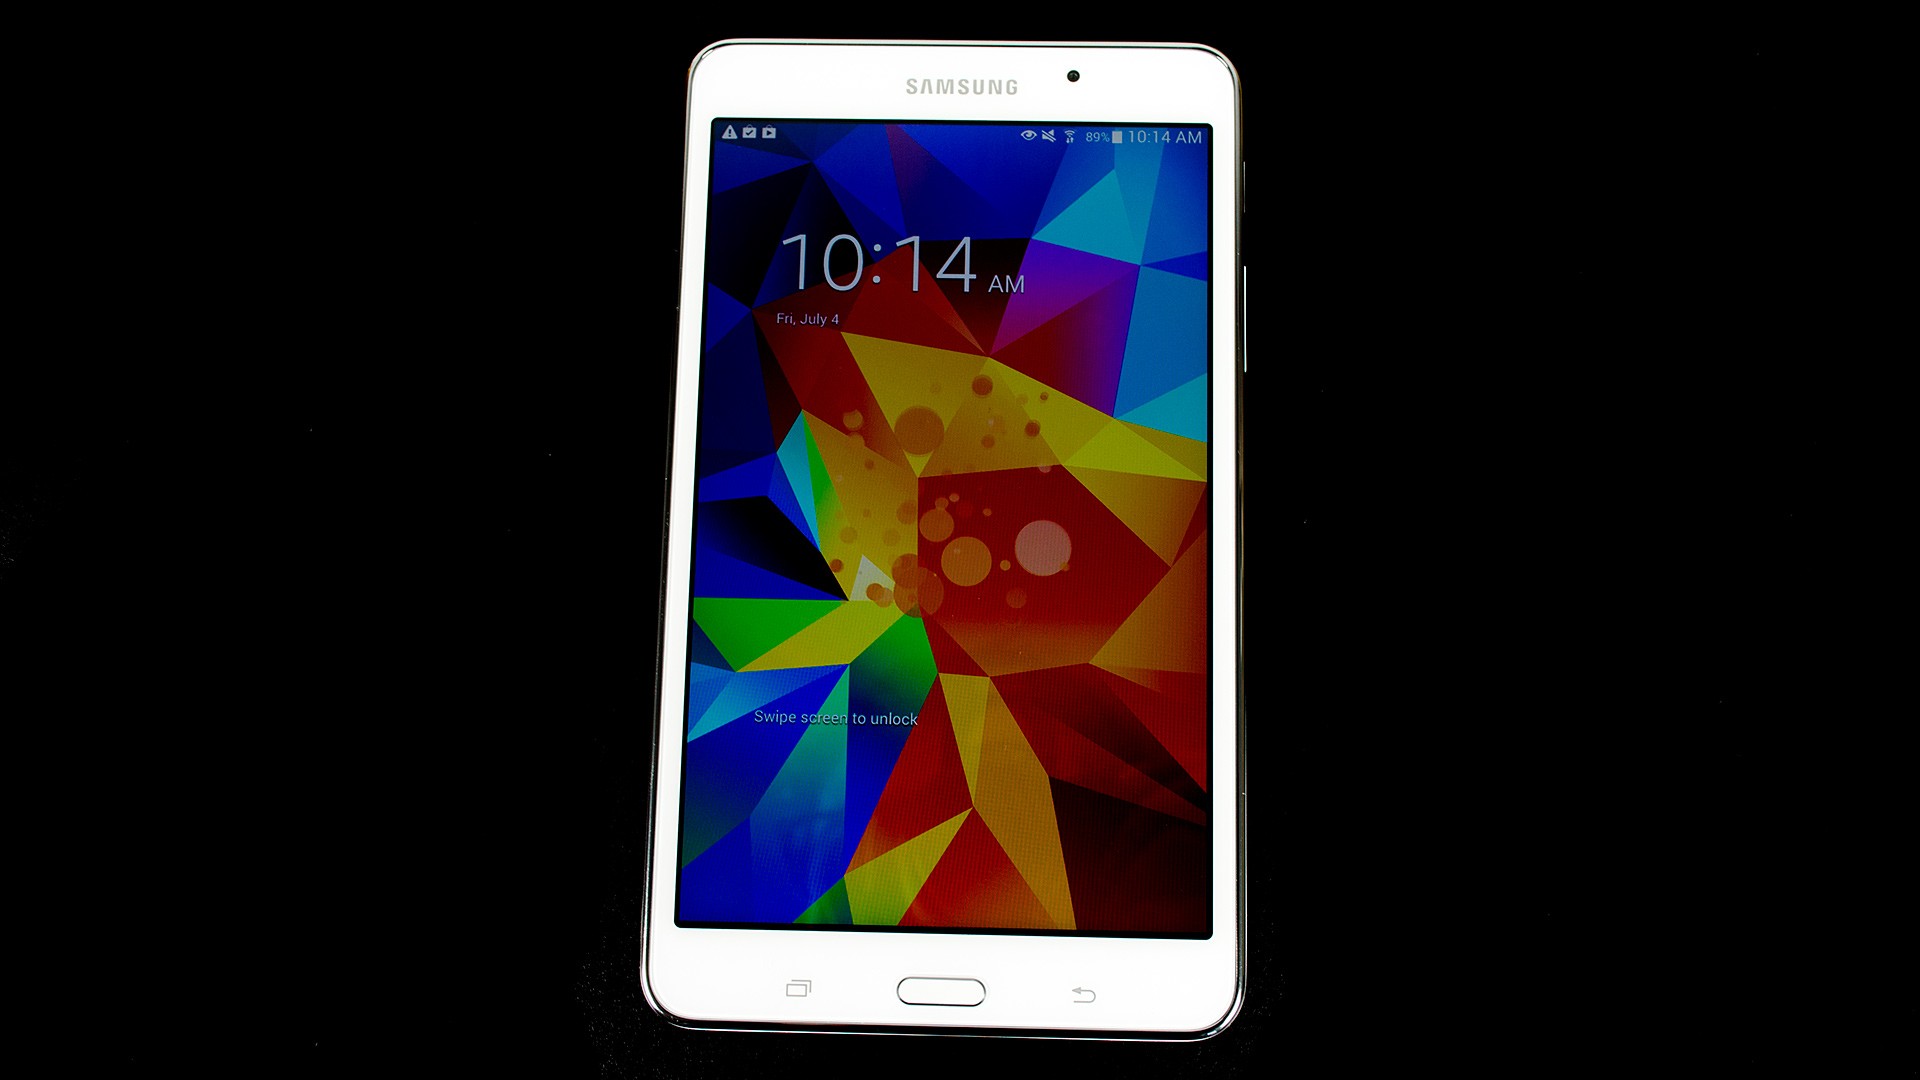 Samsung Galaxy Tab 4 7.0 review: A fine tablet, but you can do